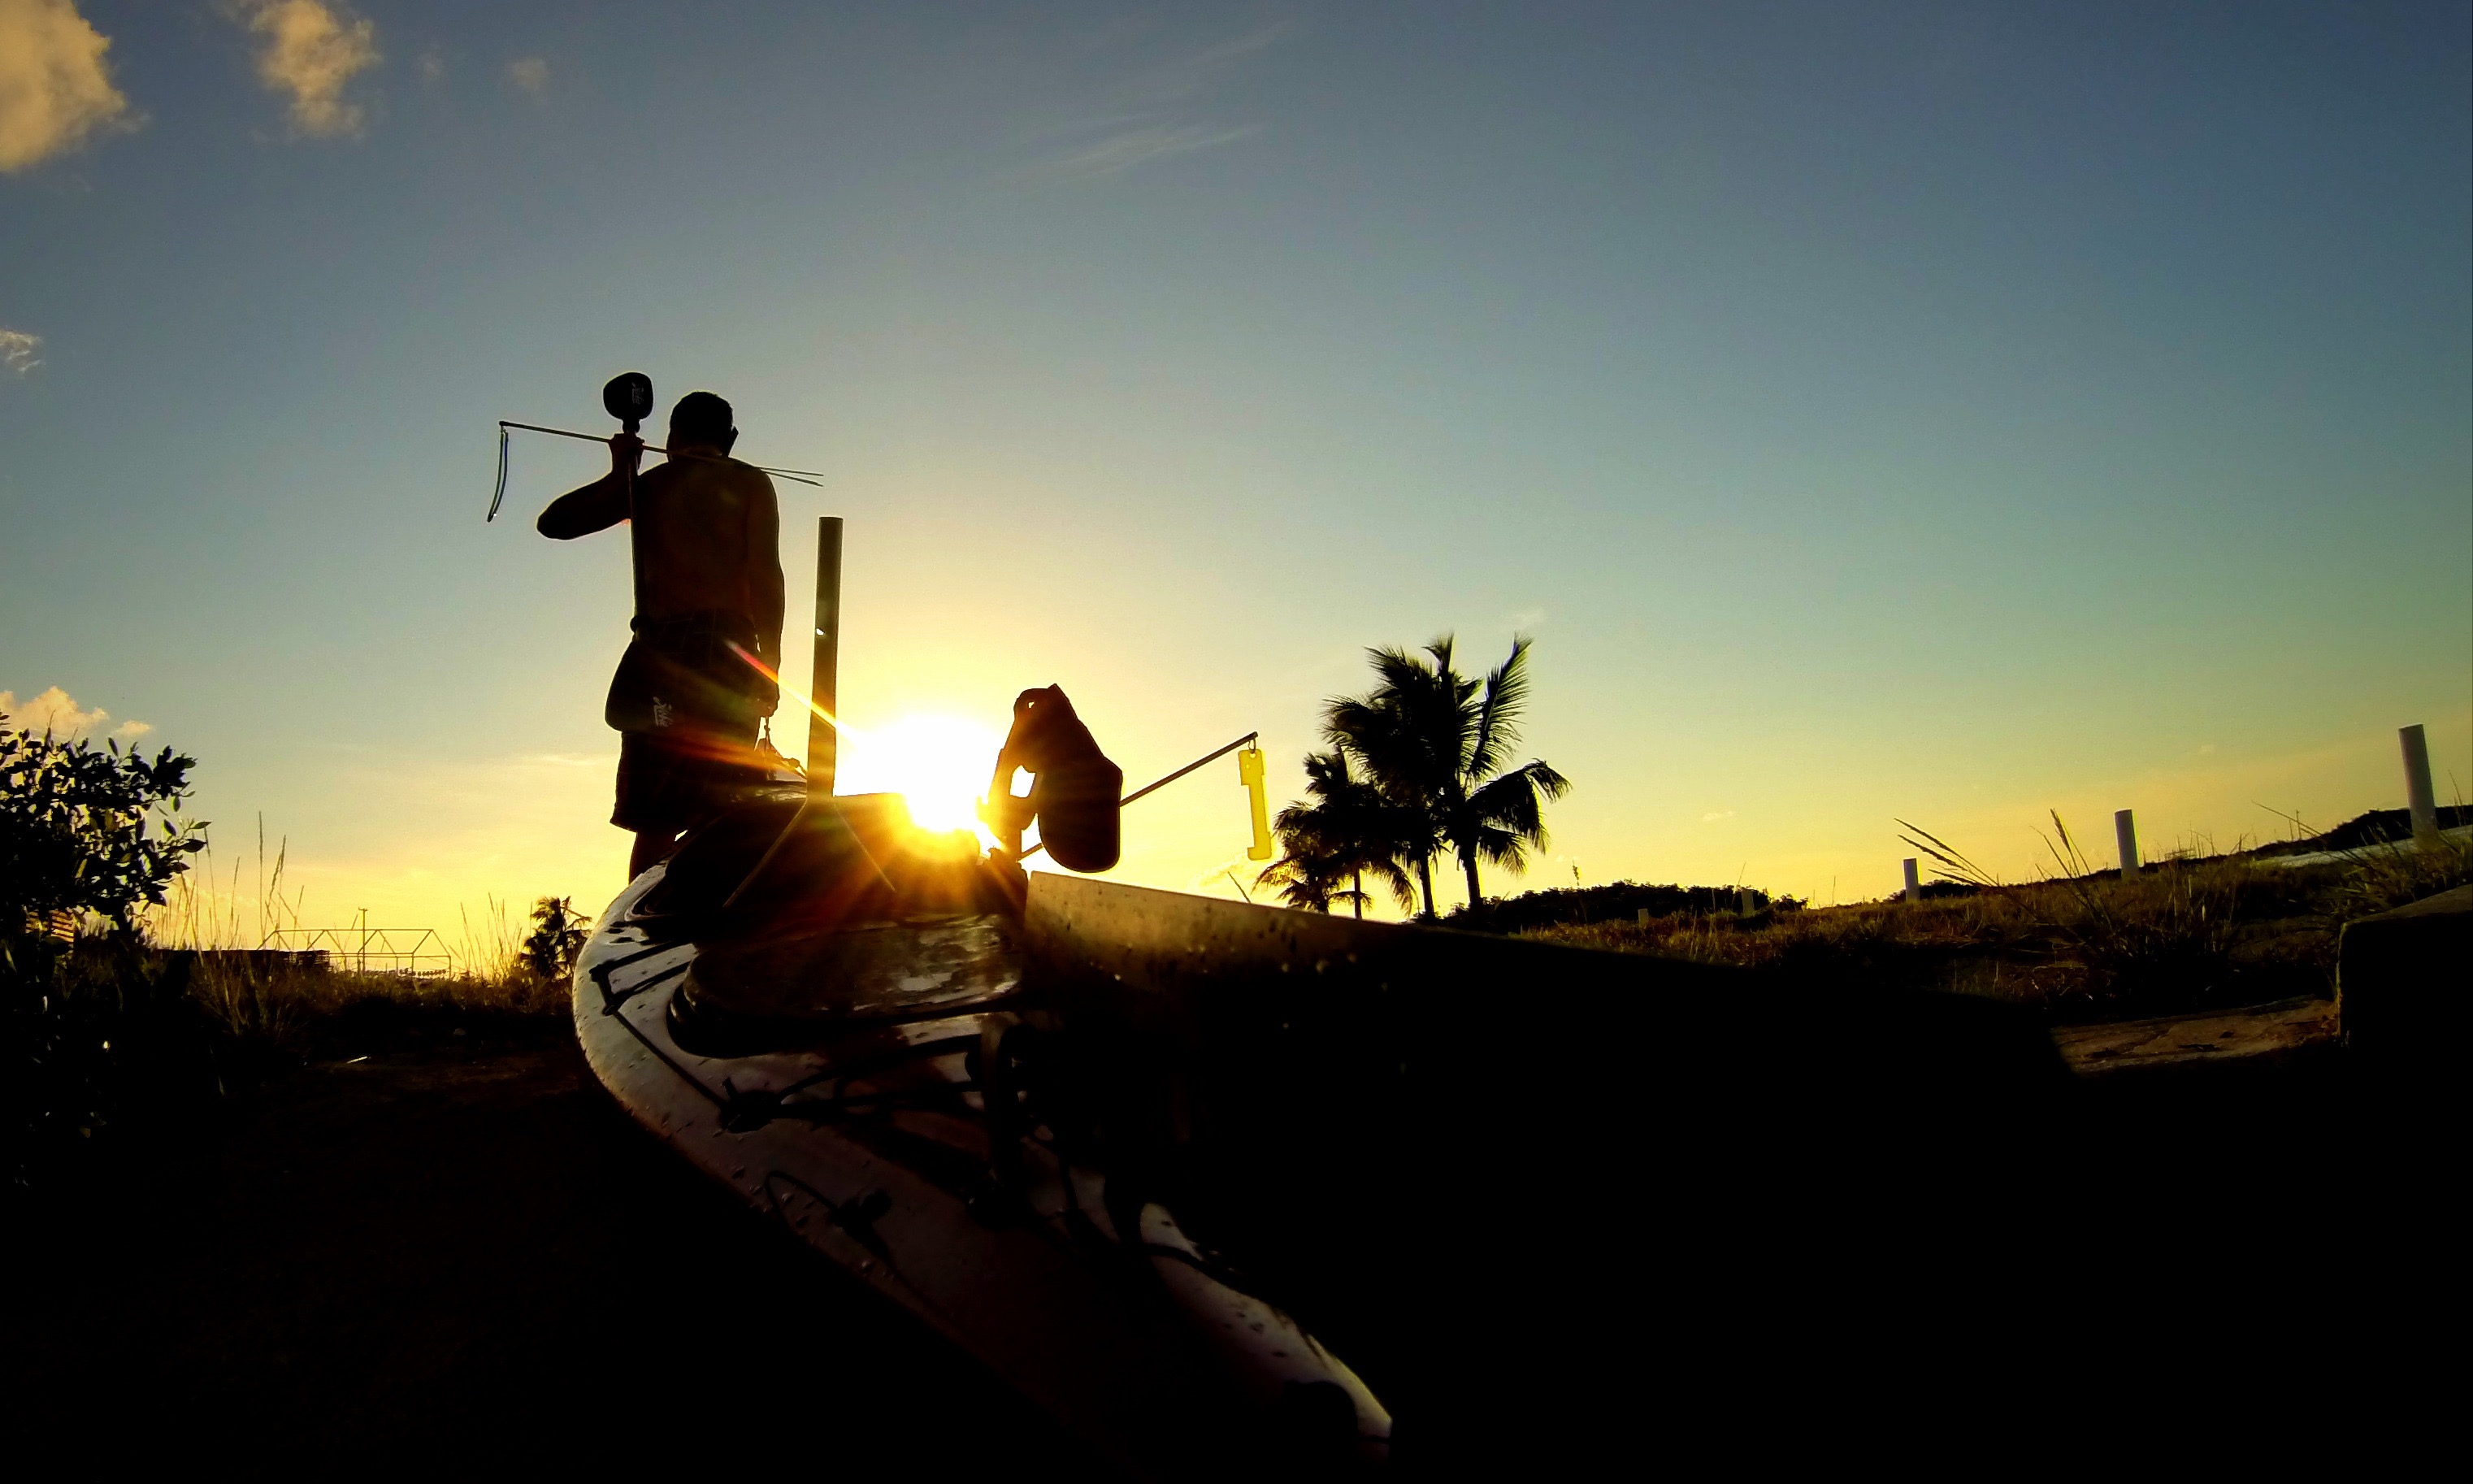 A kayak is being dragged into the sunset while someone holds a pole spear over their shoulder.